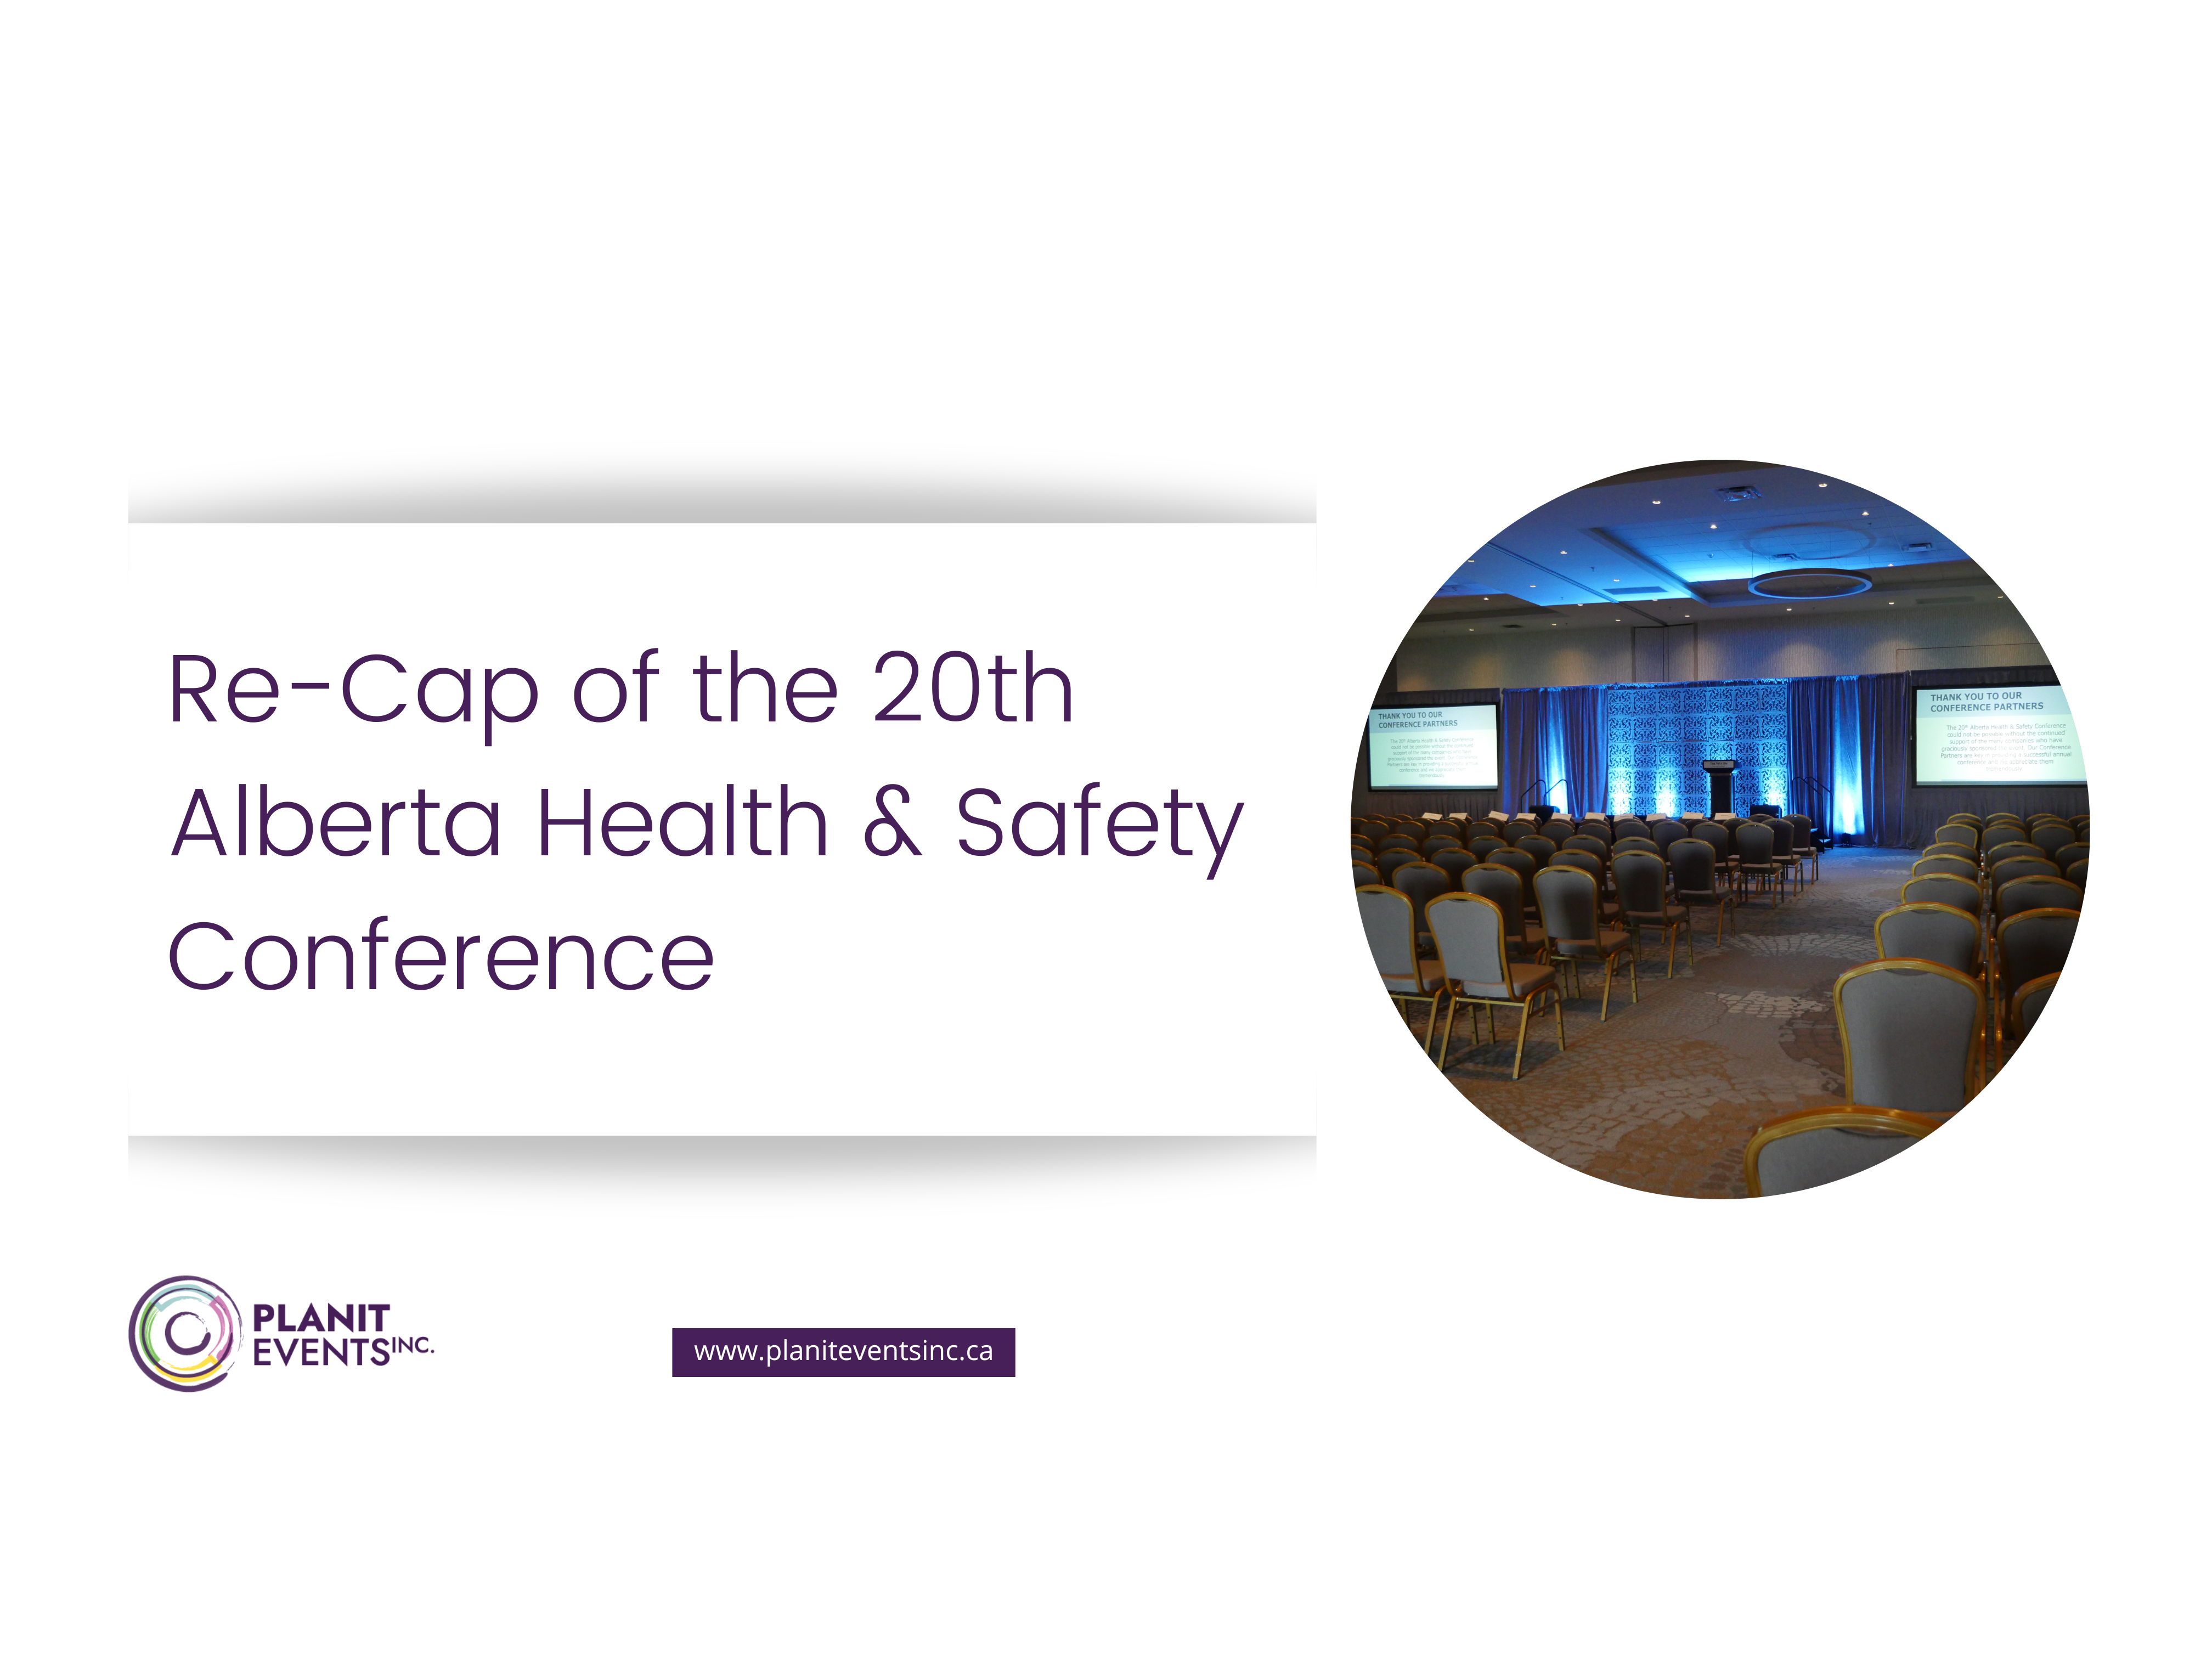 Re-Cap of the 20th Alberta Health & Safety Conference